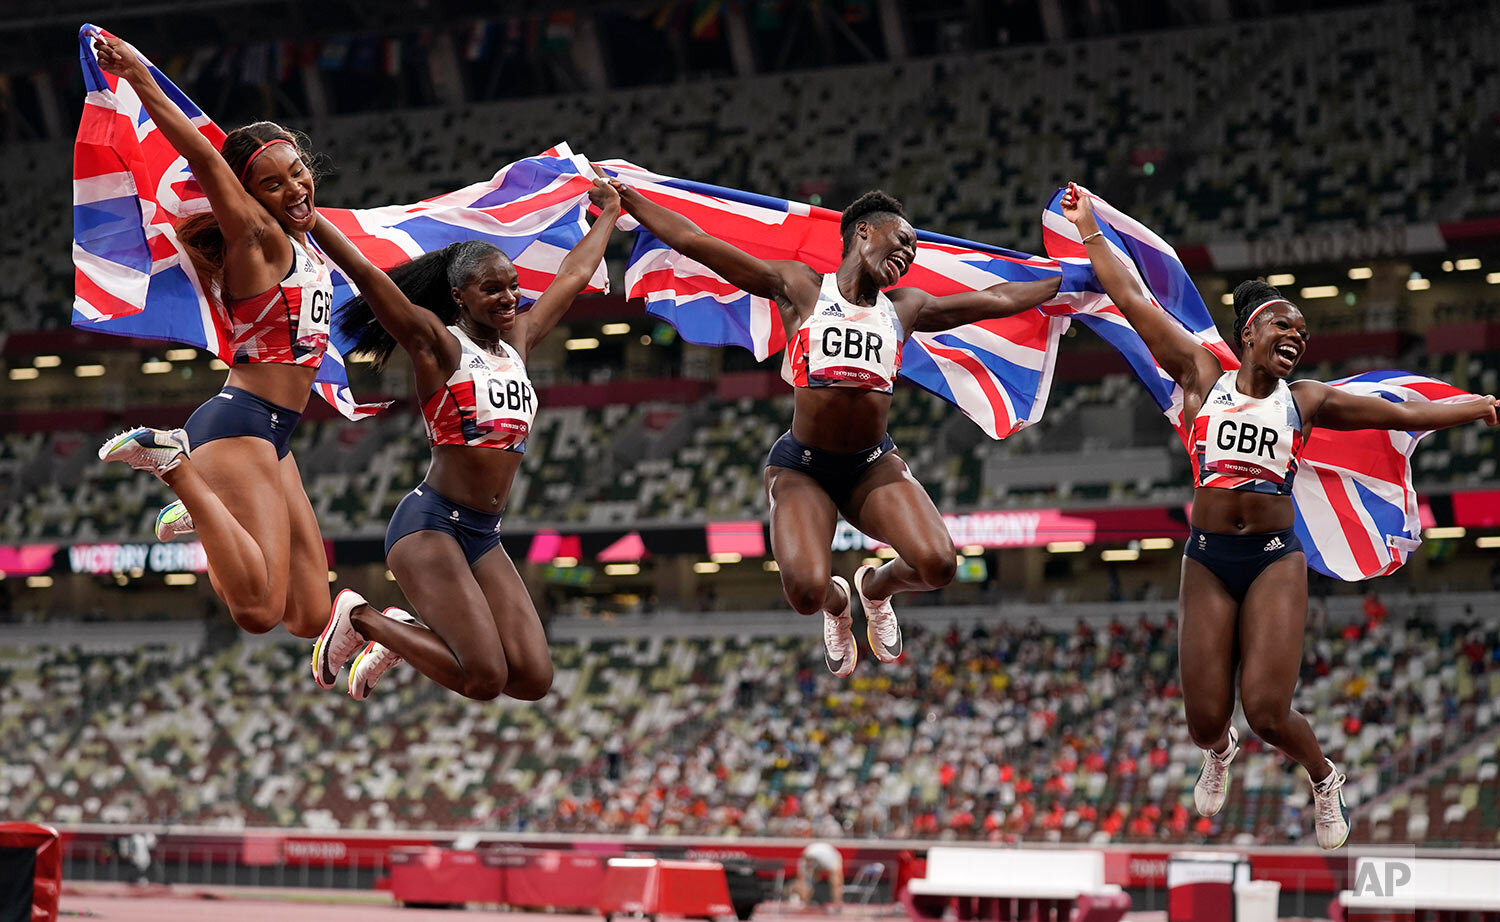  From right: Asha Philip, of Britain, Daryll Neita, Dina Asher-Smith and Imani Lansiquot, celebrate after winning the bronze medal in the final of the women's 4 x 100-meter relay at the 2020 Summer Olympics, Friday, Aug. 6, 2021, in Tokyo.  (AP Photo